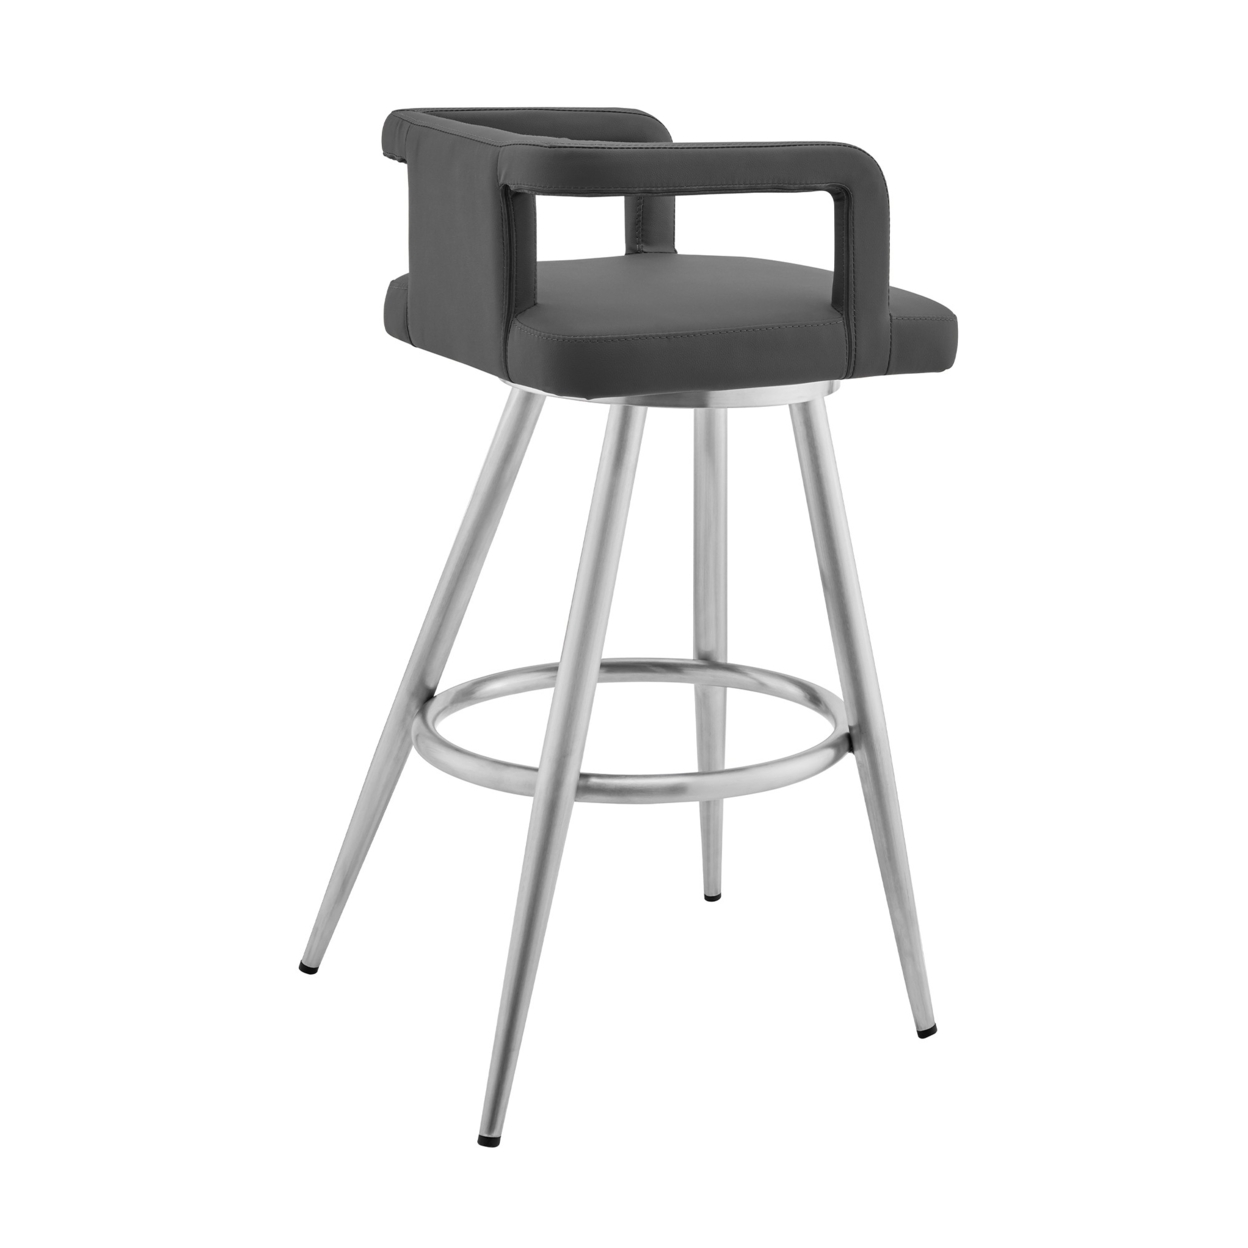 Gabriele 26 Gray Faux Leather And Brushed Stainless Steel Swivel Bar Stool- Saltoro Sherpi